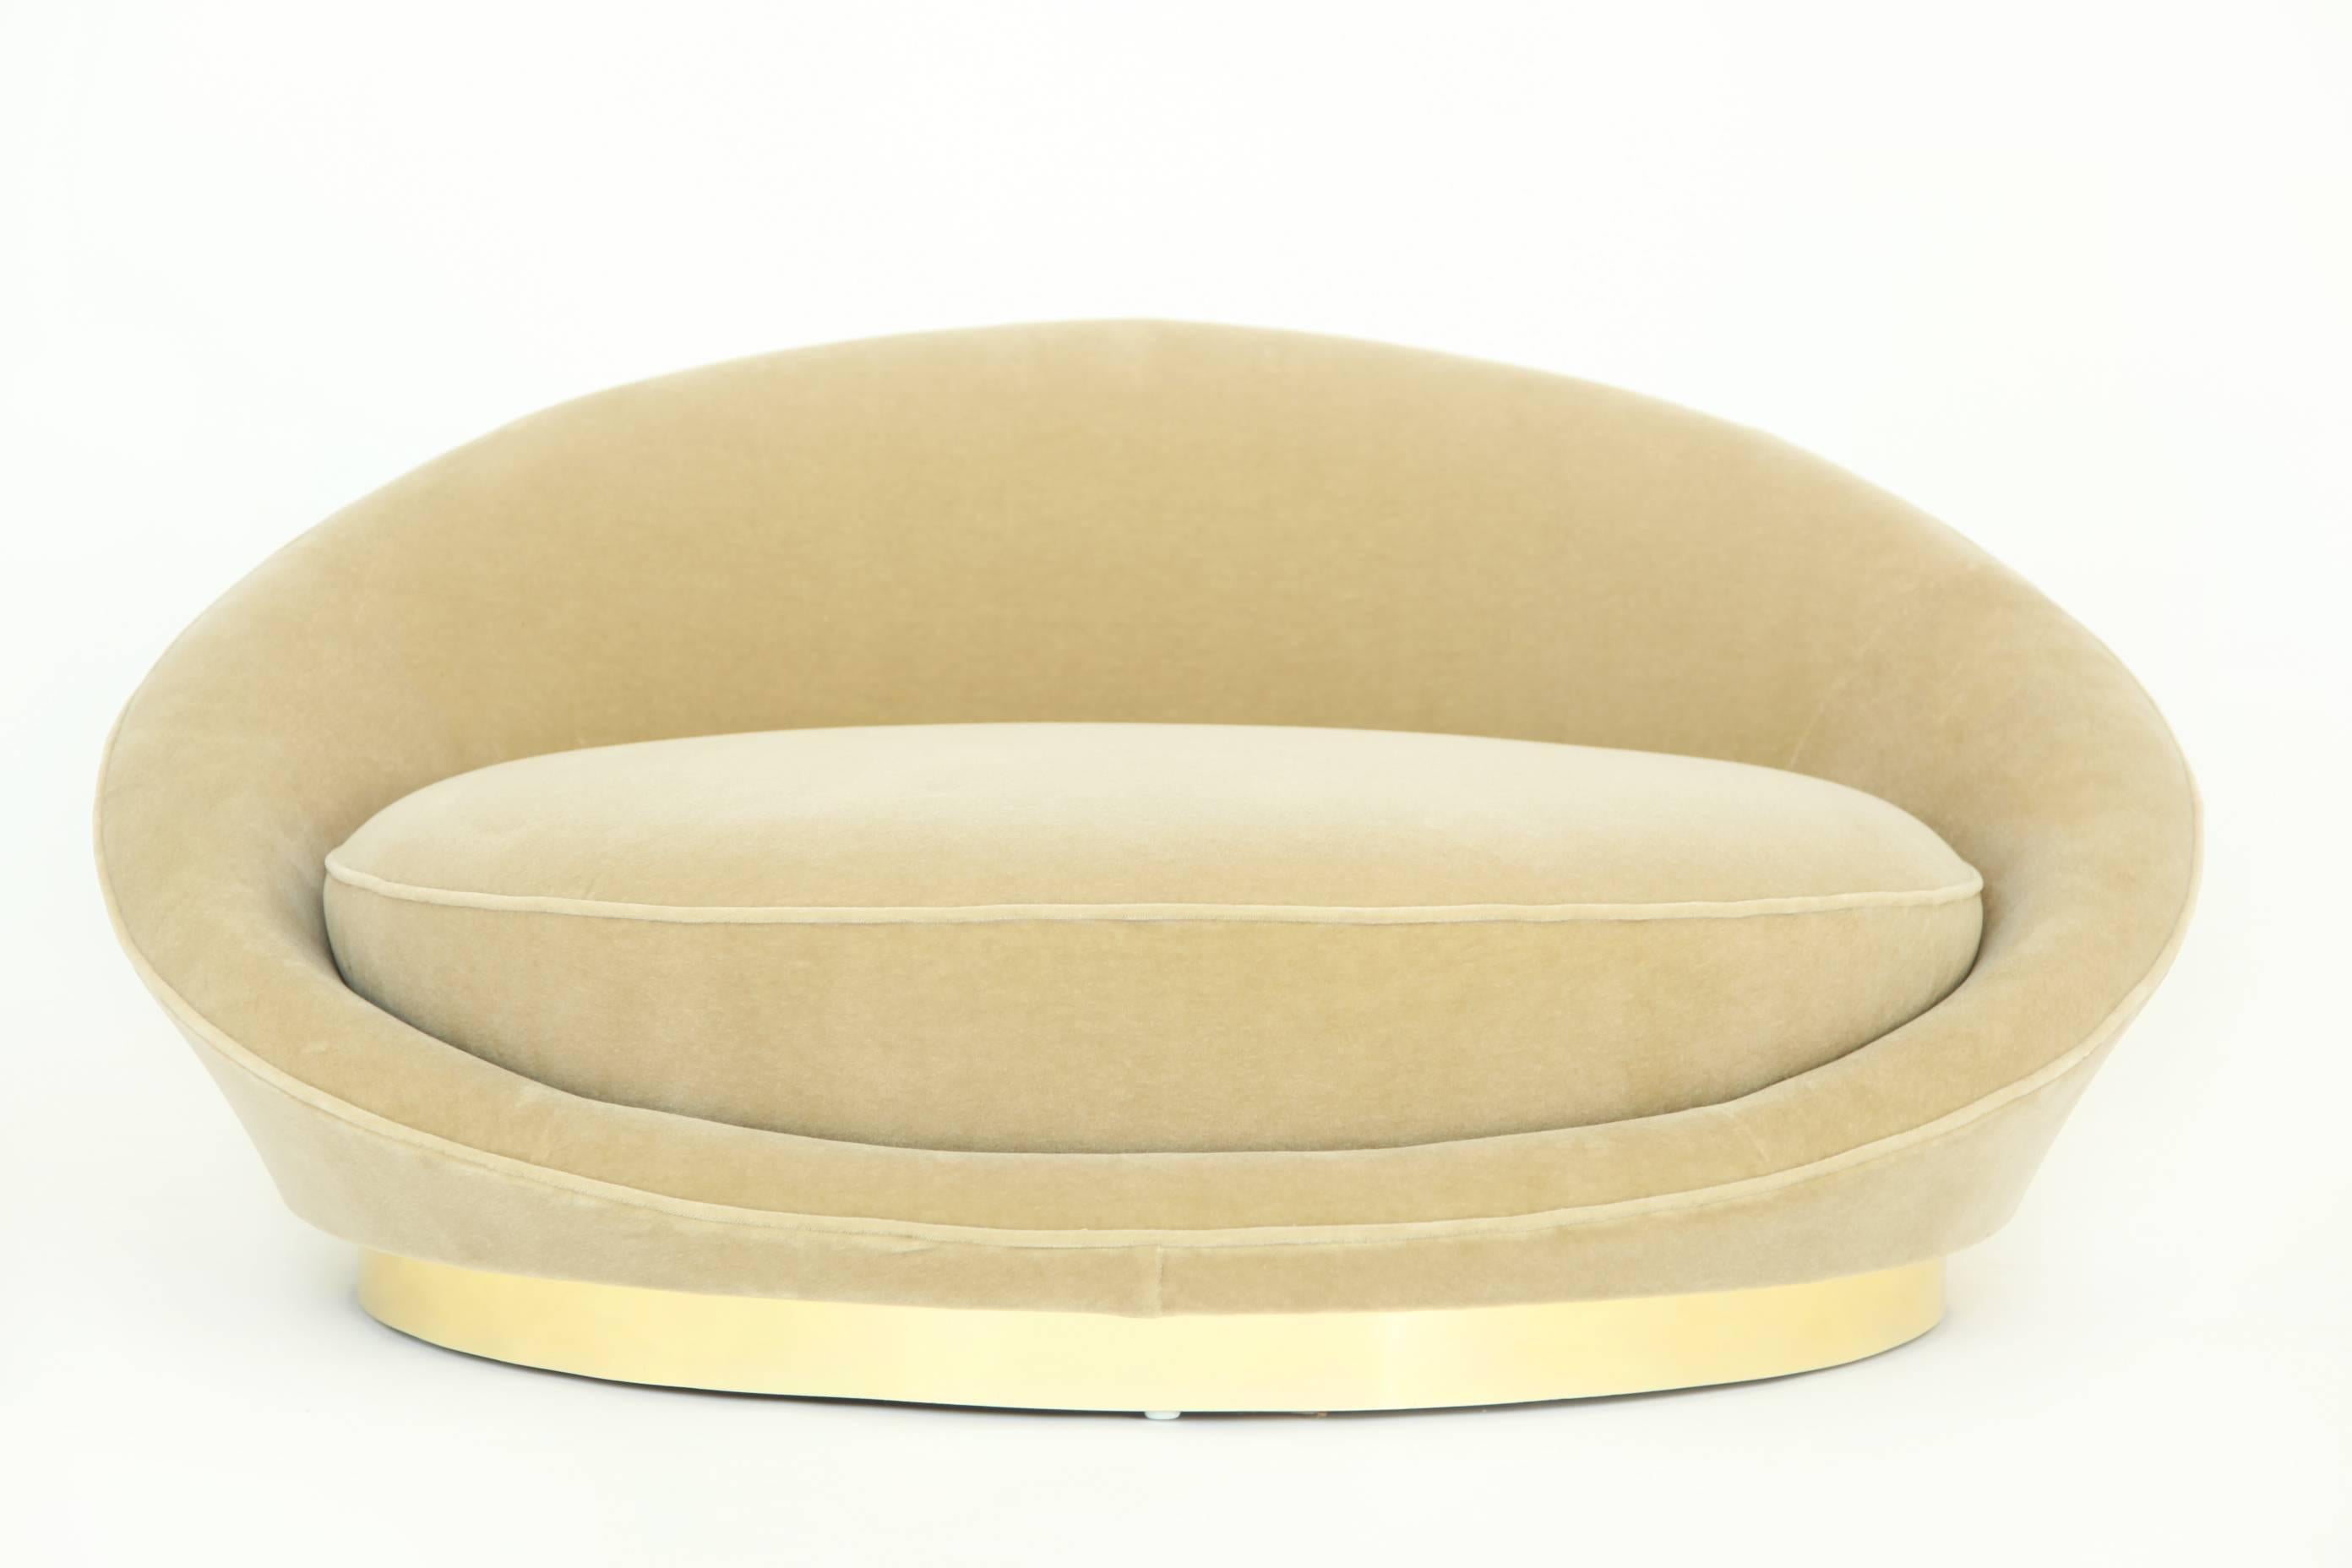 Milo Baughman for Thayer Coggin; oversized chaise lounge for 1-2 people.  Curved barrel back and spring cushion wrapped in a beige/champagne mohair, rests on top of a brass plinth base.